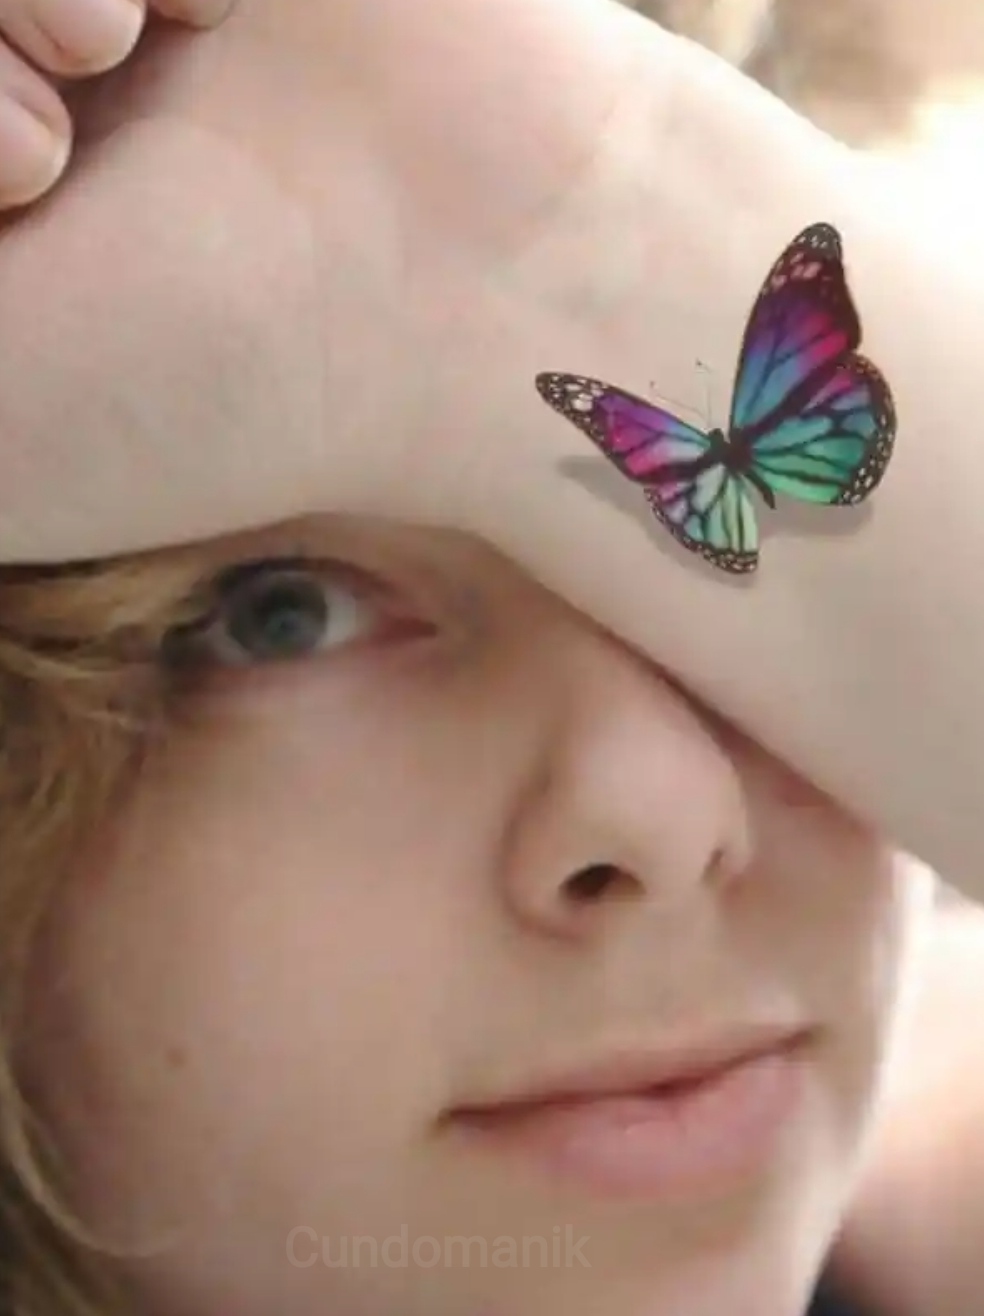 Get to know 3D Tattoos